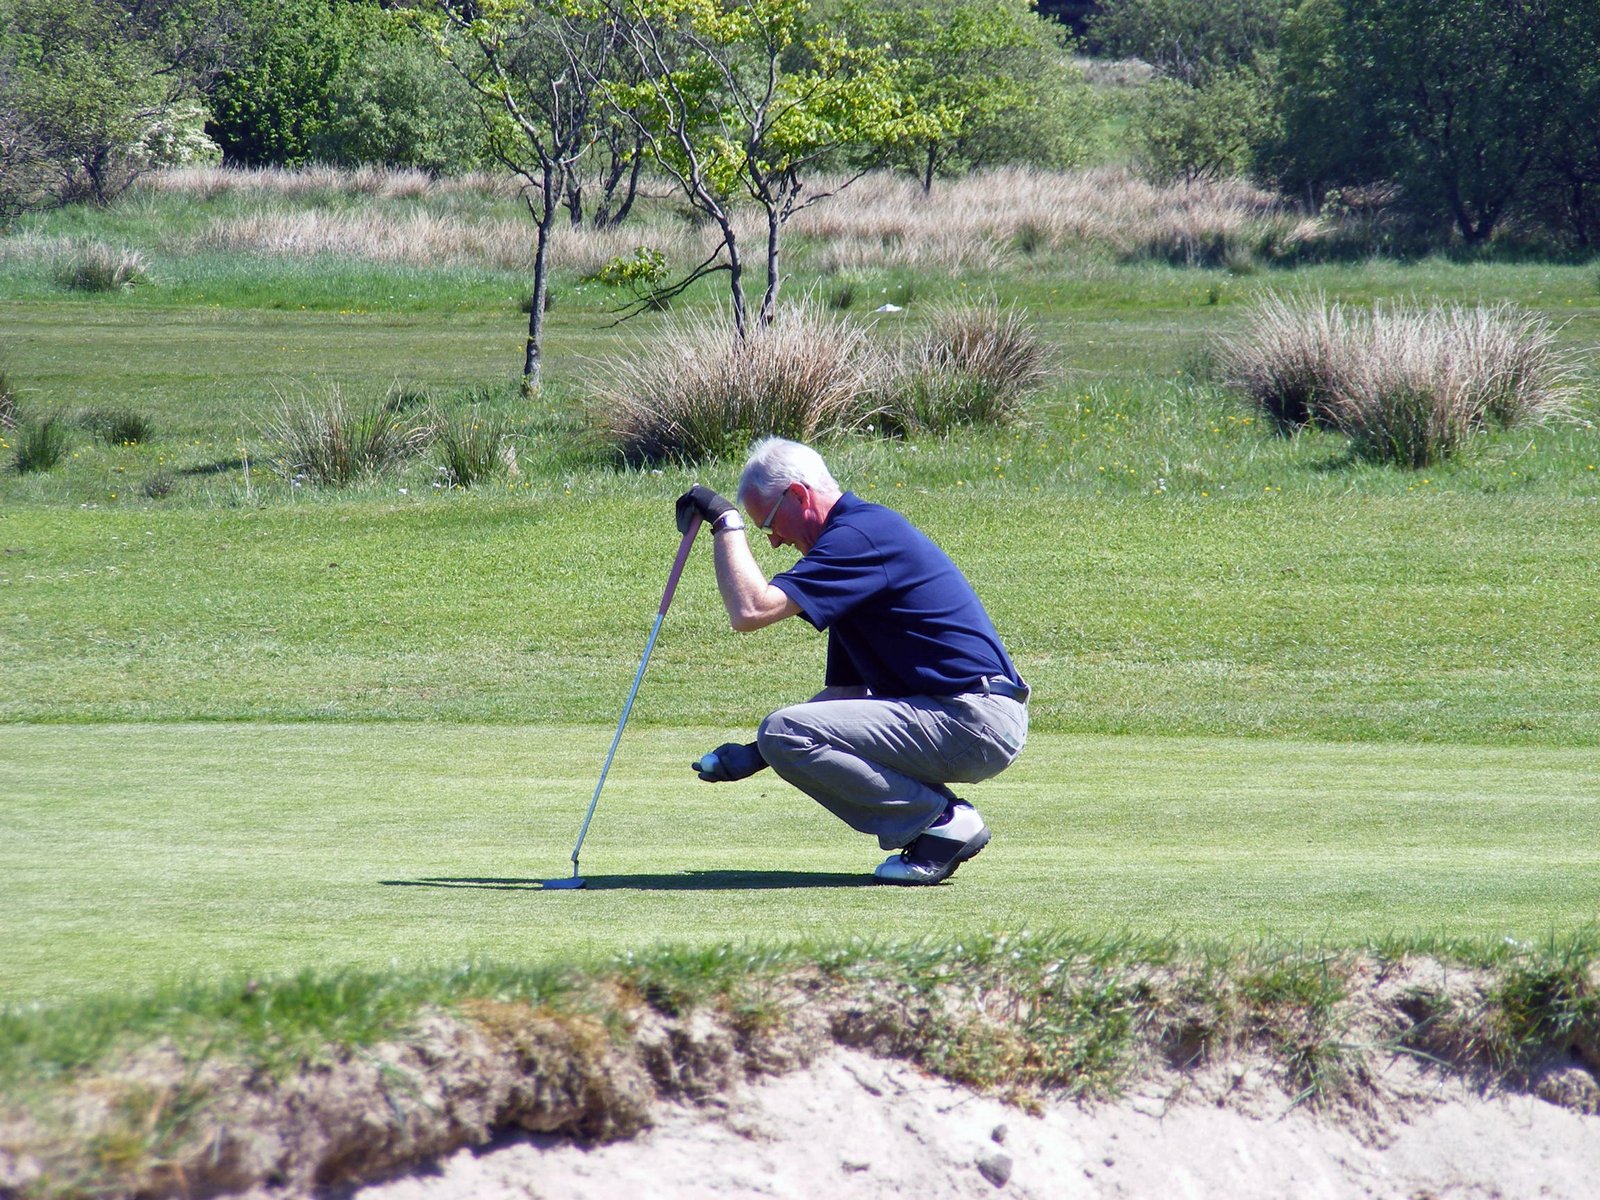 a man who is bent down to hit a golf ball with a club